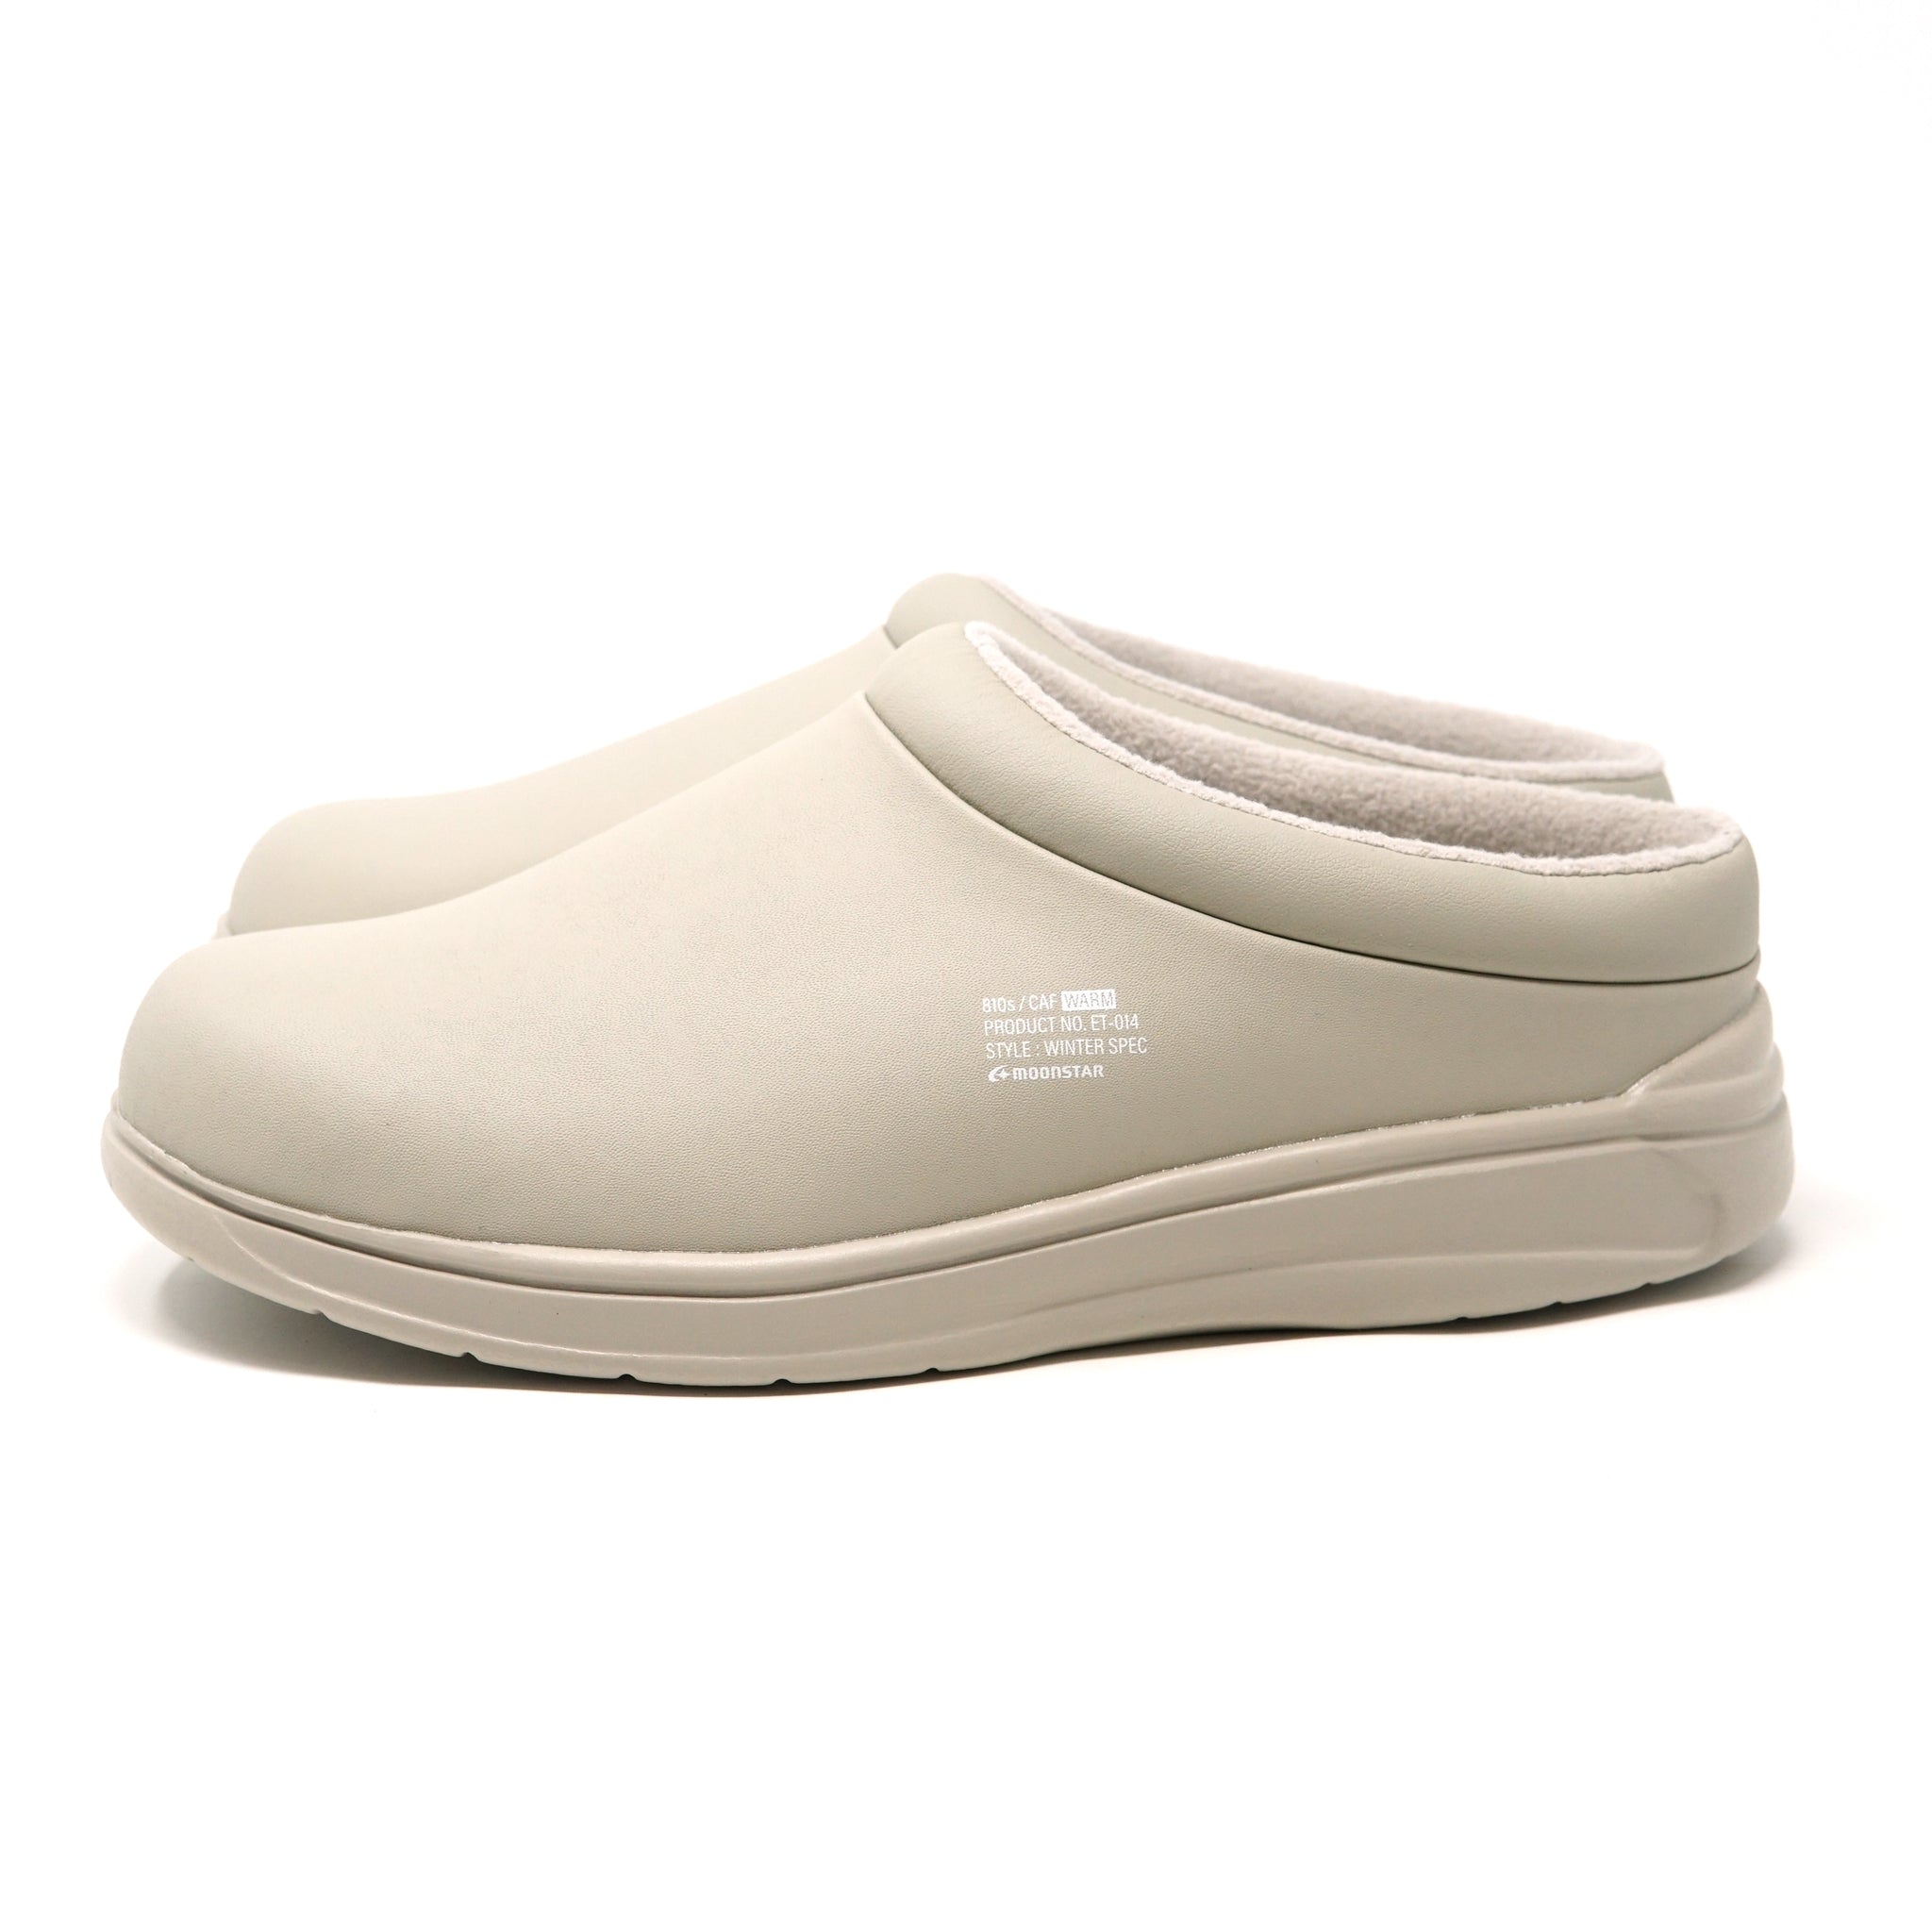 NO:ET014 | Name:CAF WARM カフ ウォーム | Color:Beige【810S_エイトテンス】【MOONSTAR_ムーンスター】